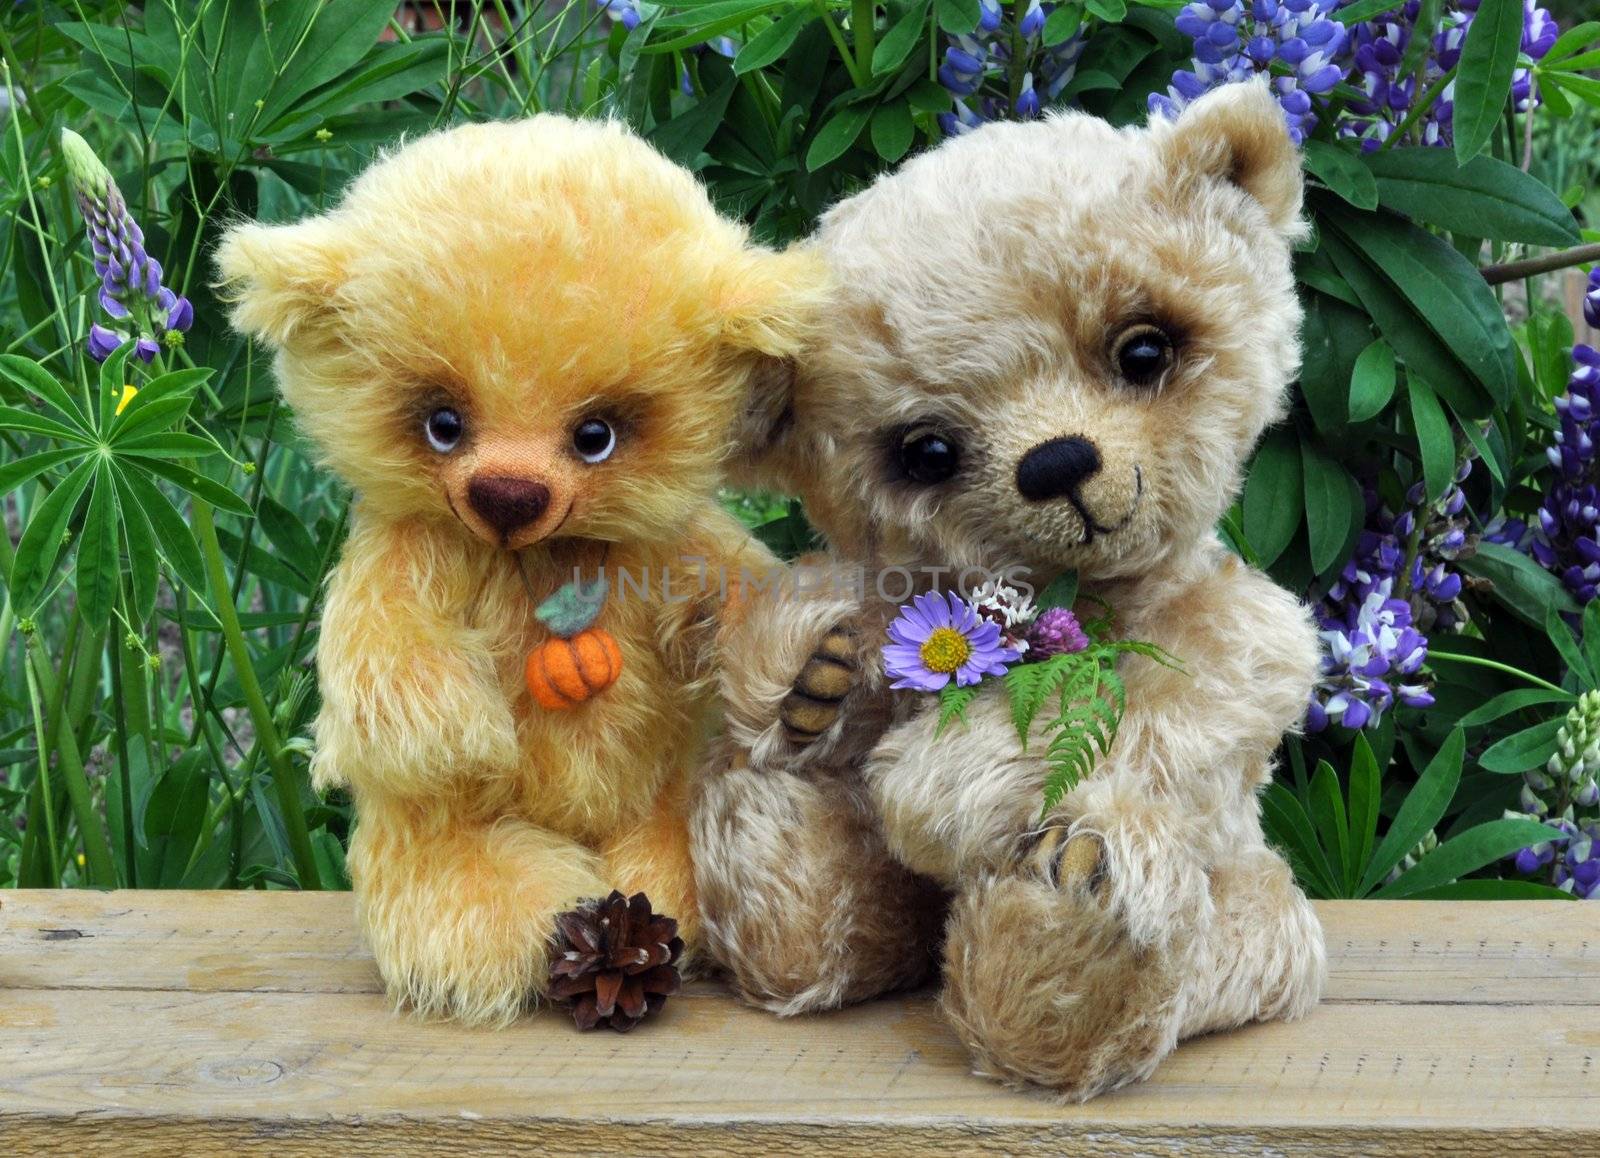 Teddy bears among flowers by alexcoolok